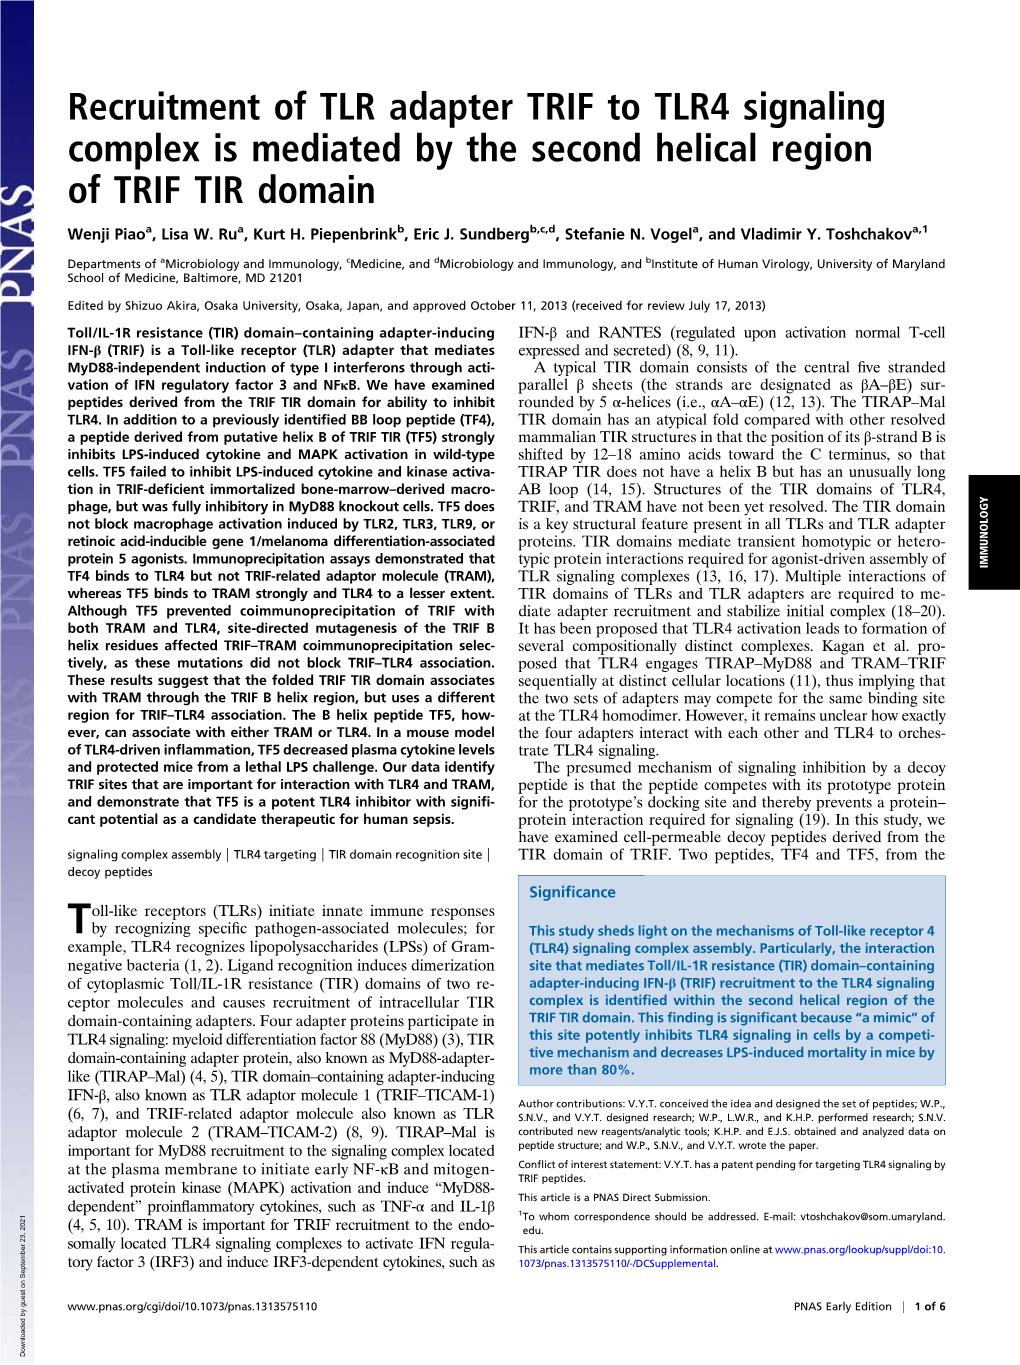 Recruitment of TLR Adapter TRIF to TLR4 Signaling Complex Is Mediated by the Second Helical Region of TRIF TIR Domain